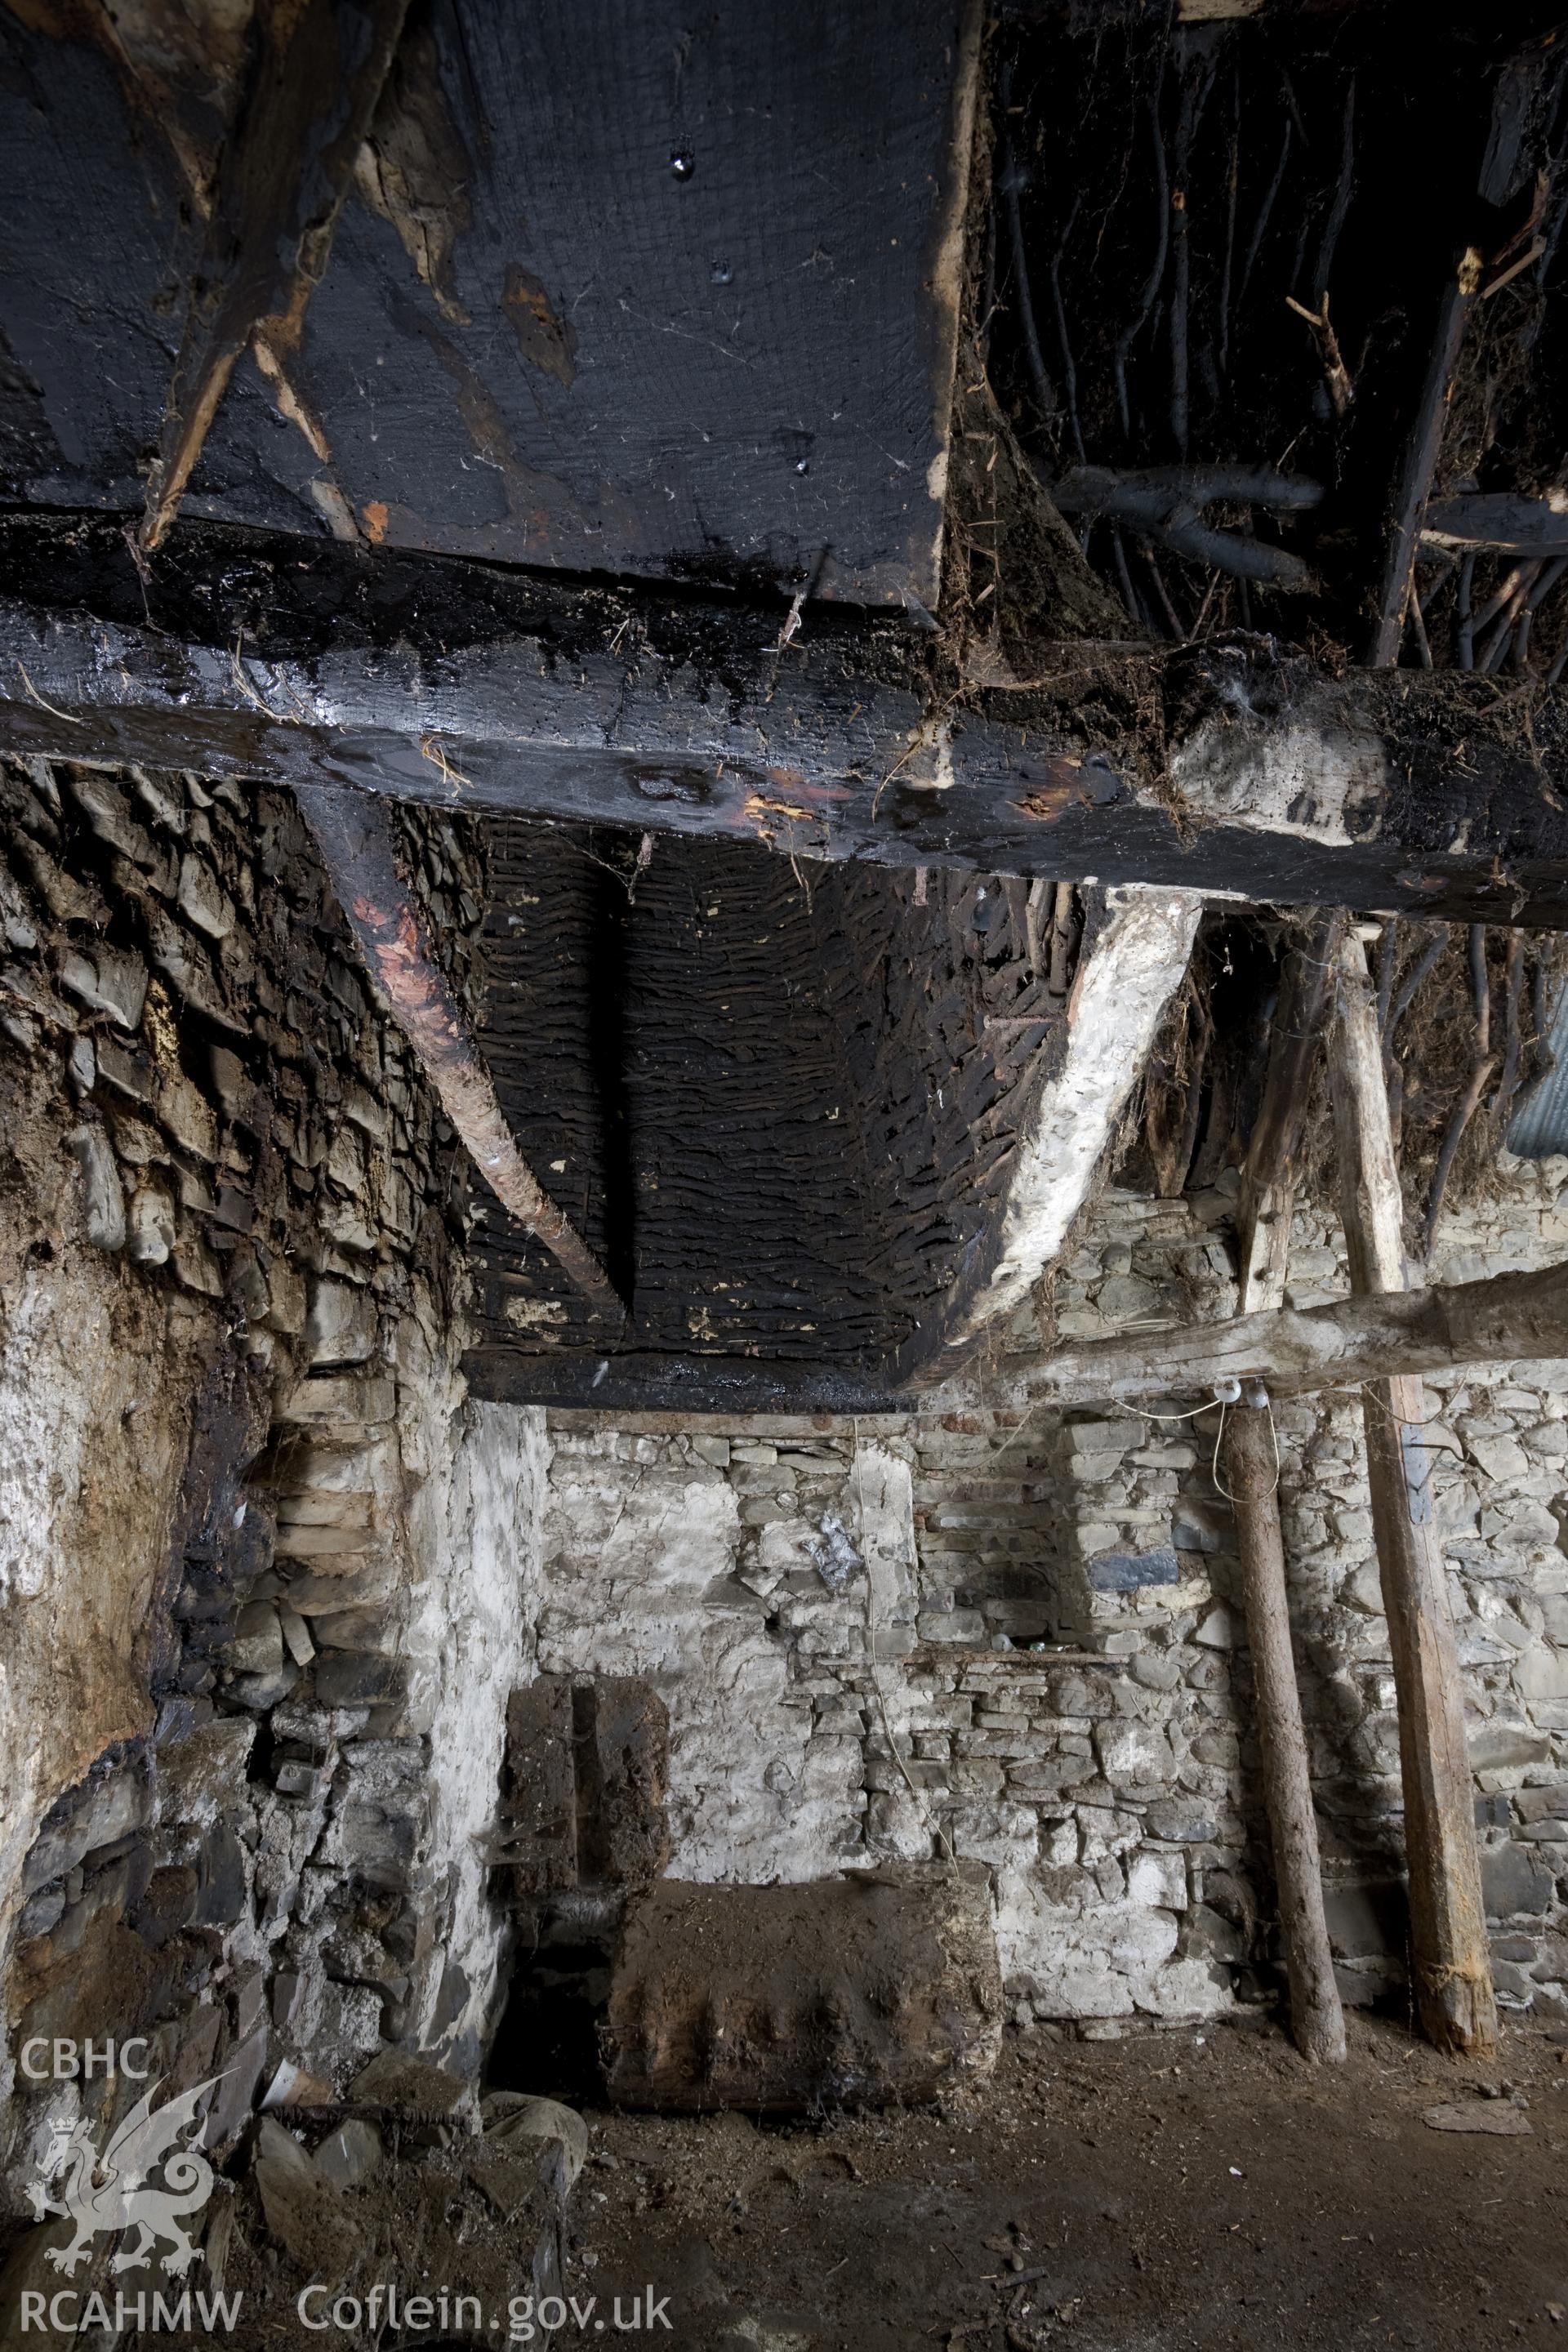 Interior view of Wigwen Fach showing the wicker fireplace hood.